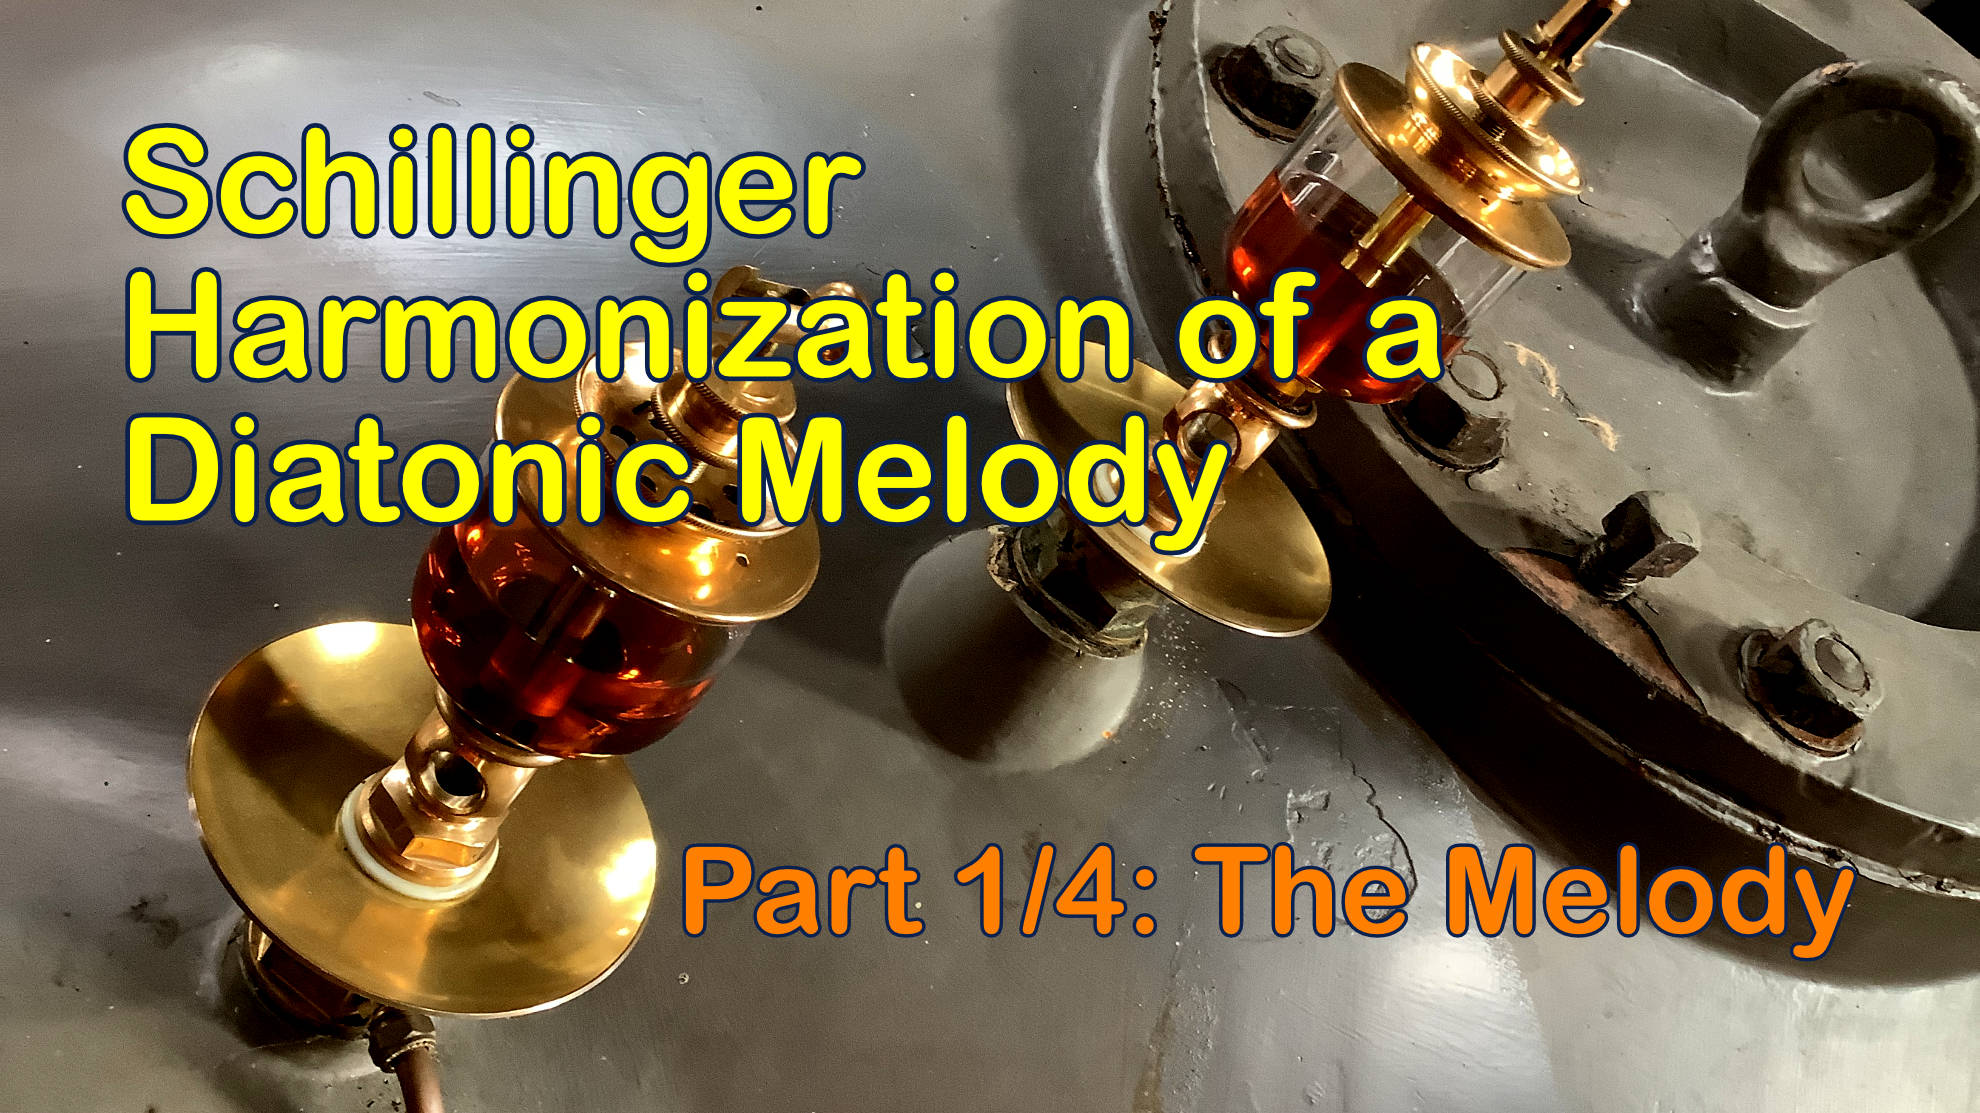 YouTube thumbnail for the Schillinger Harmonization of a Diatonic Melody Part 1 video tutorial